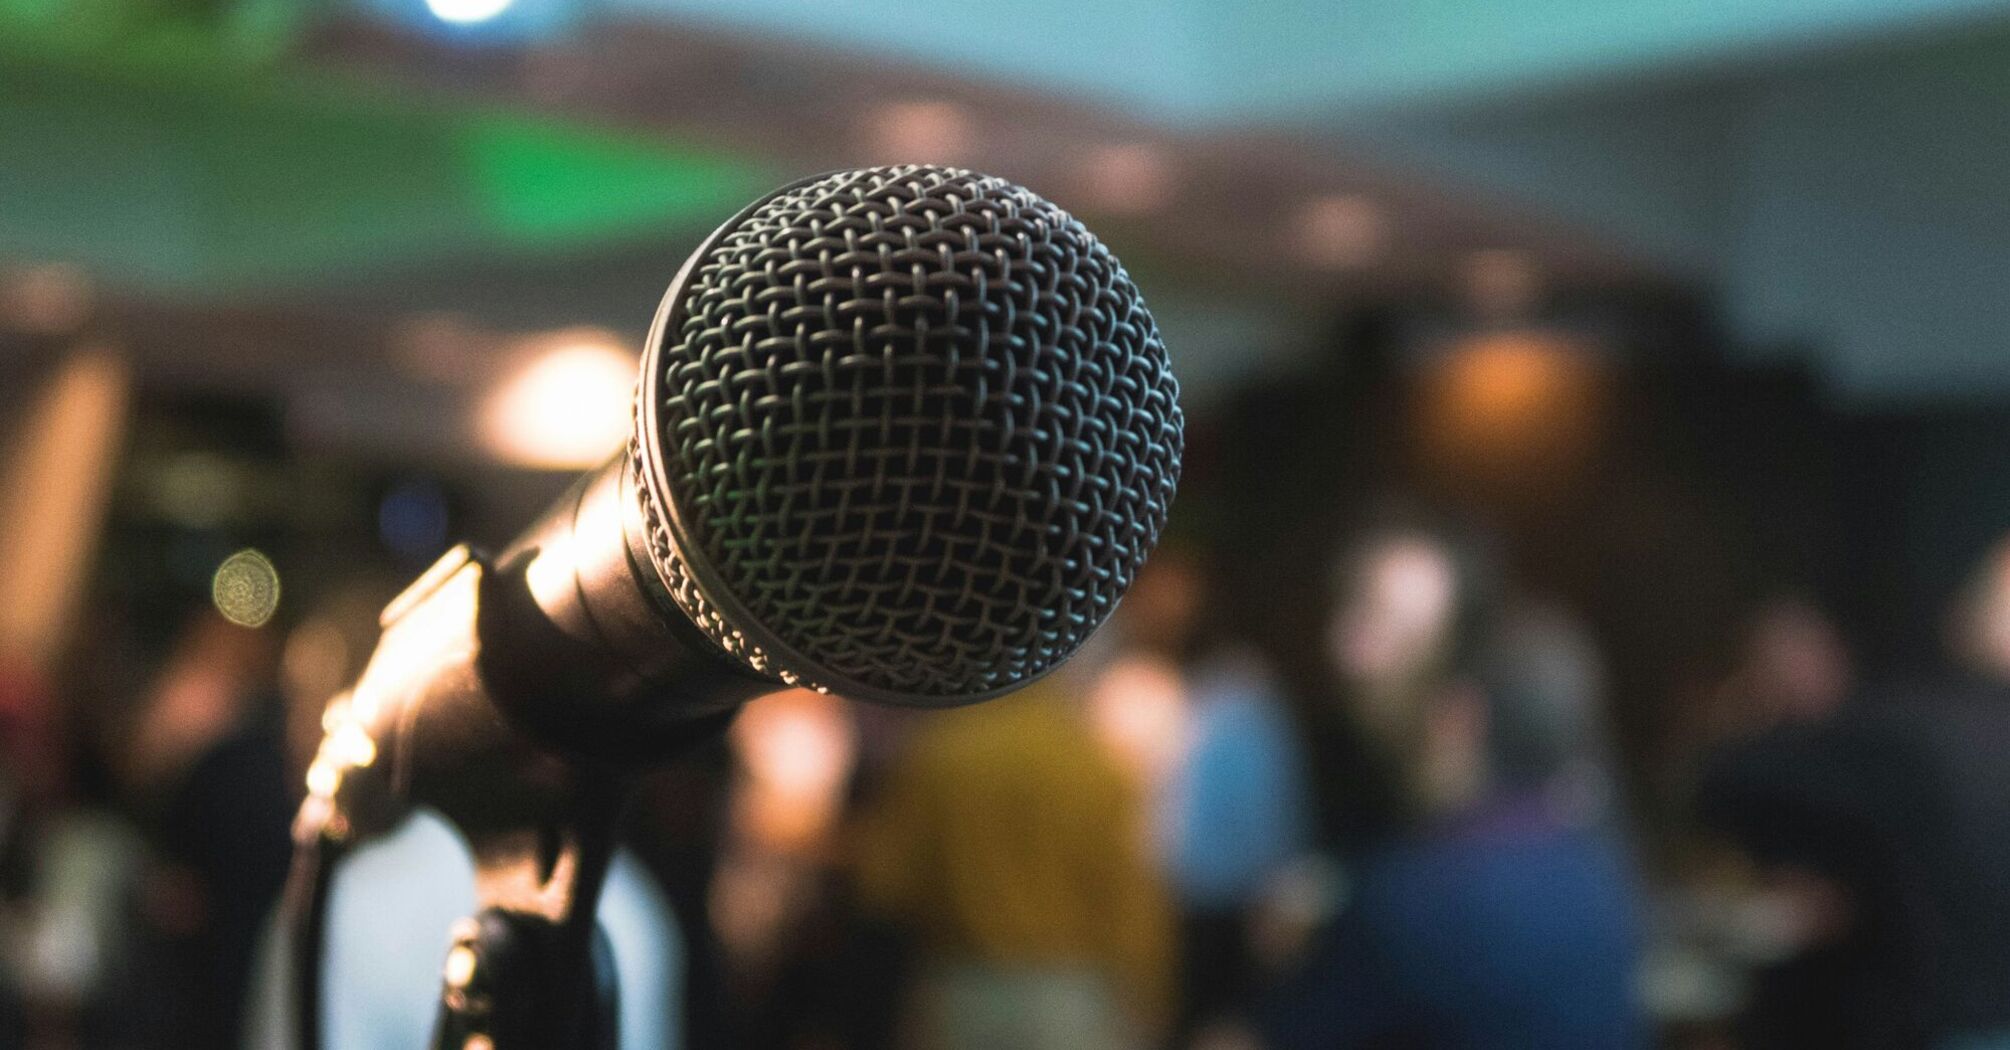 A close-up of a microphone in focus with a blurred background of people in a conference setting